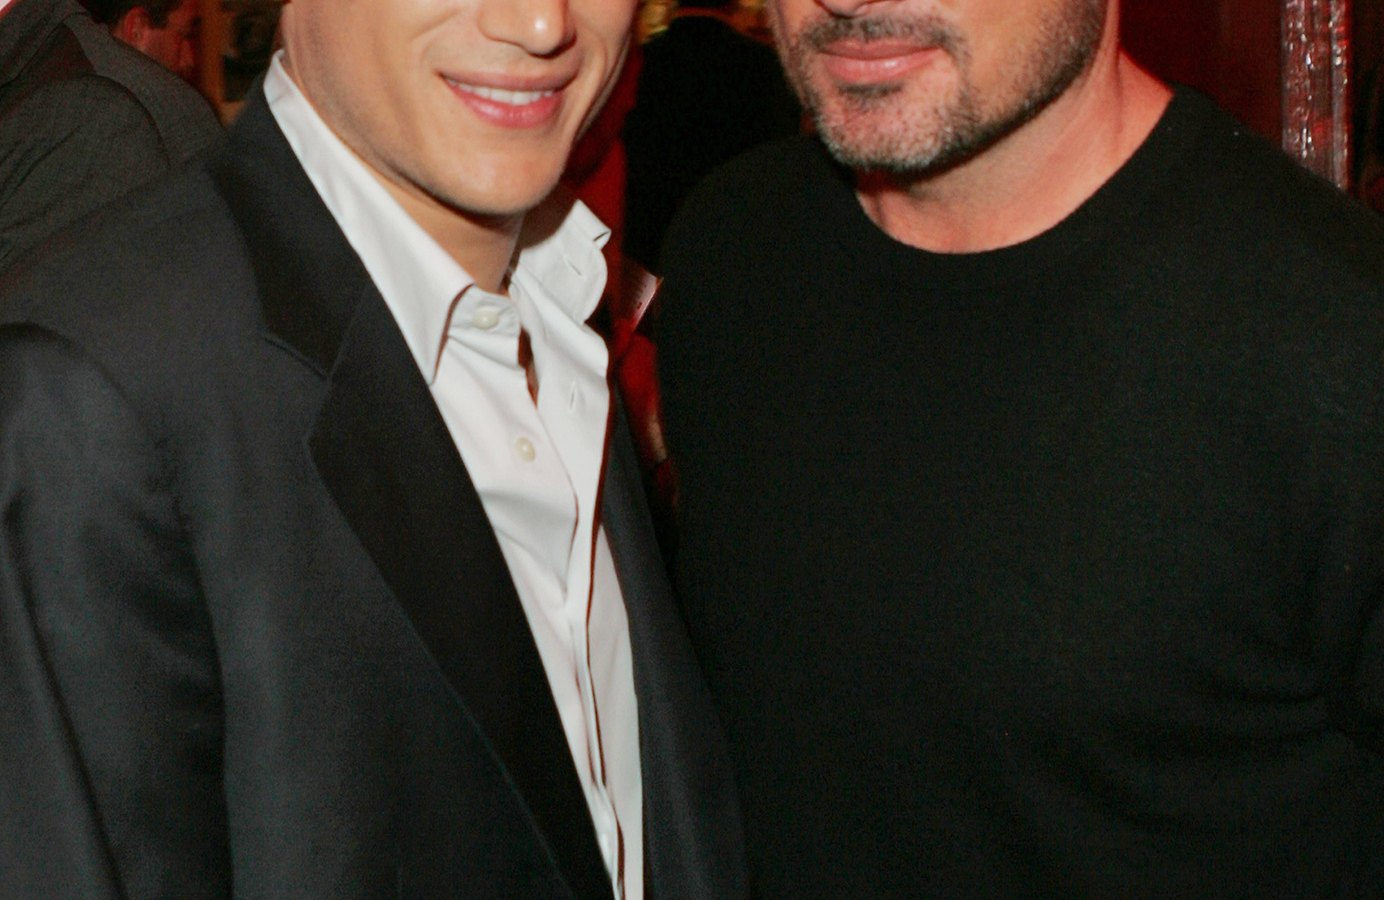 Dominic Purcell and Wentworth Miller